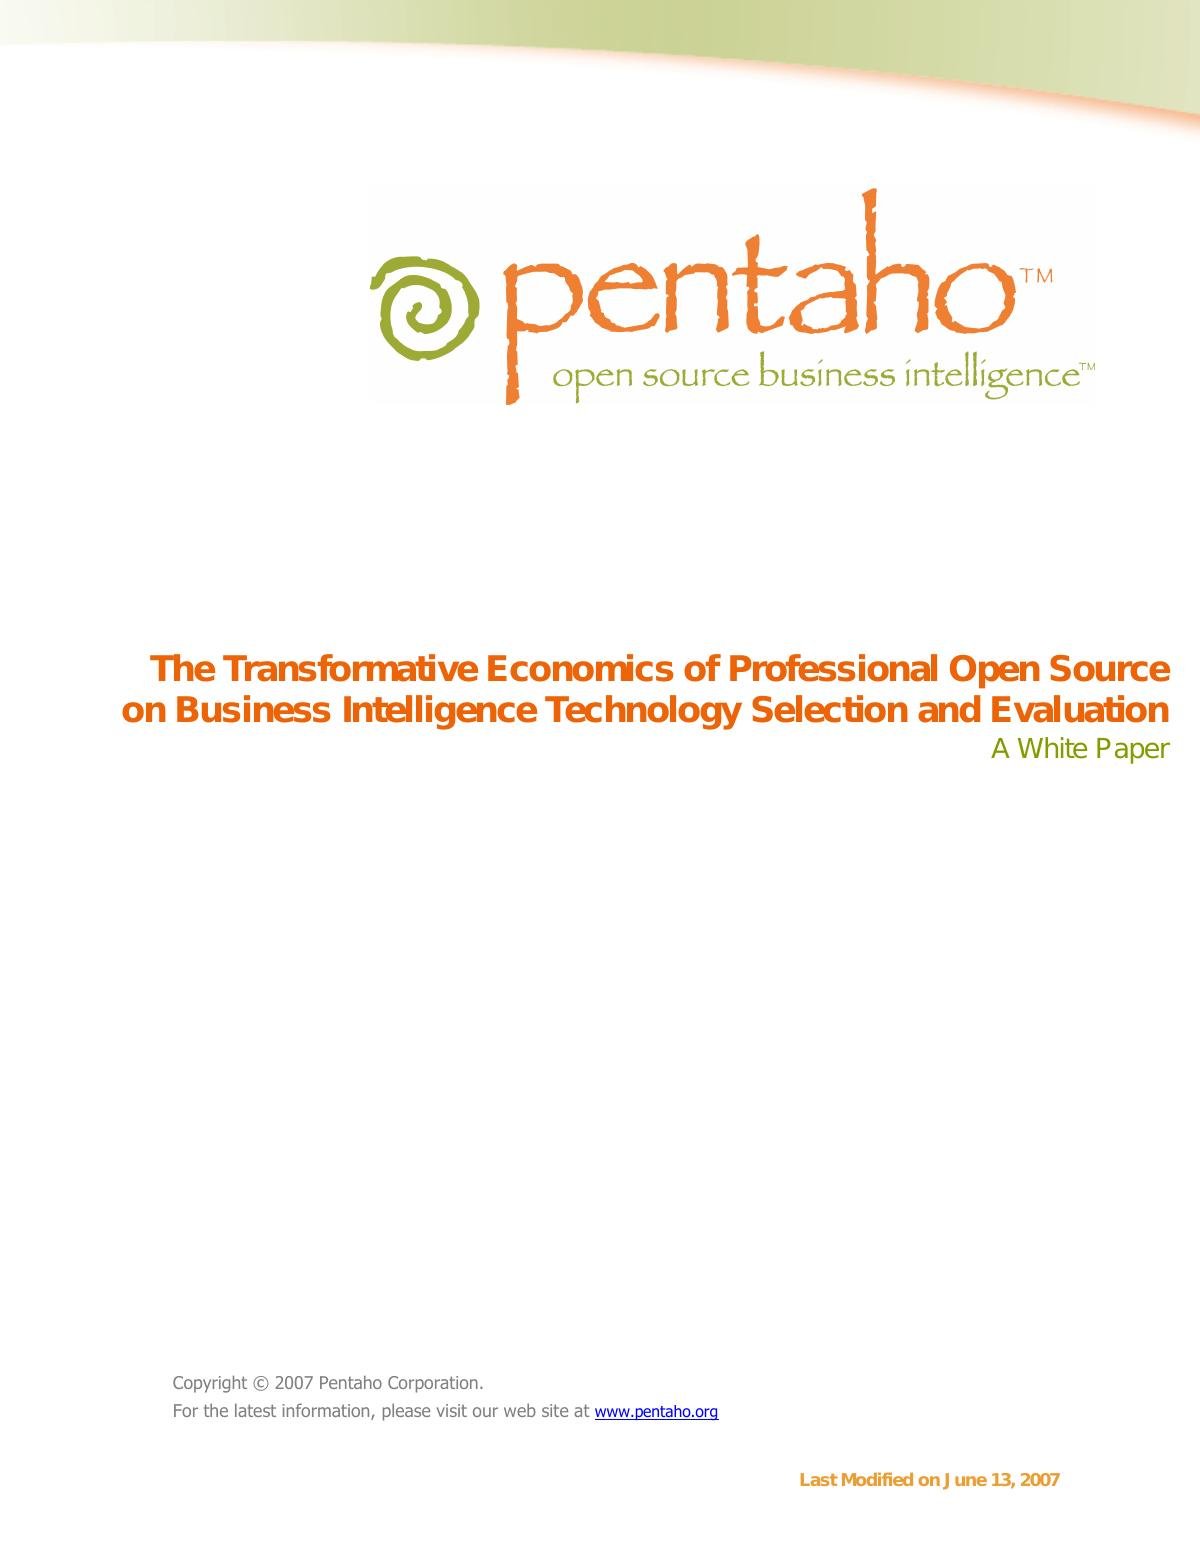 The Transformative Economics of Professional Open Source on Business Intelligence Technology